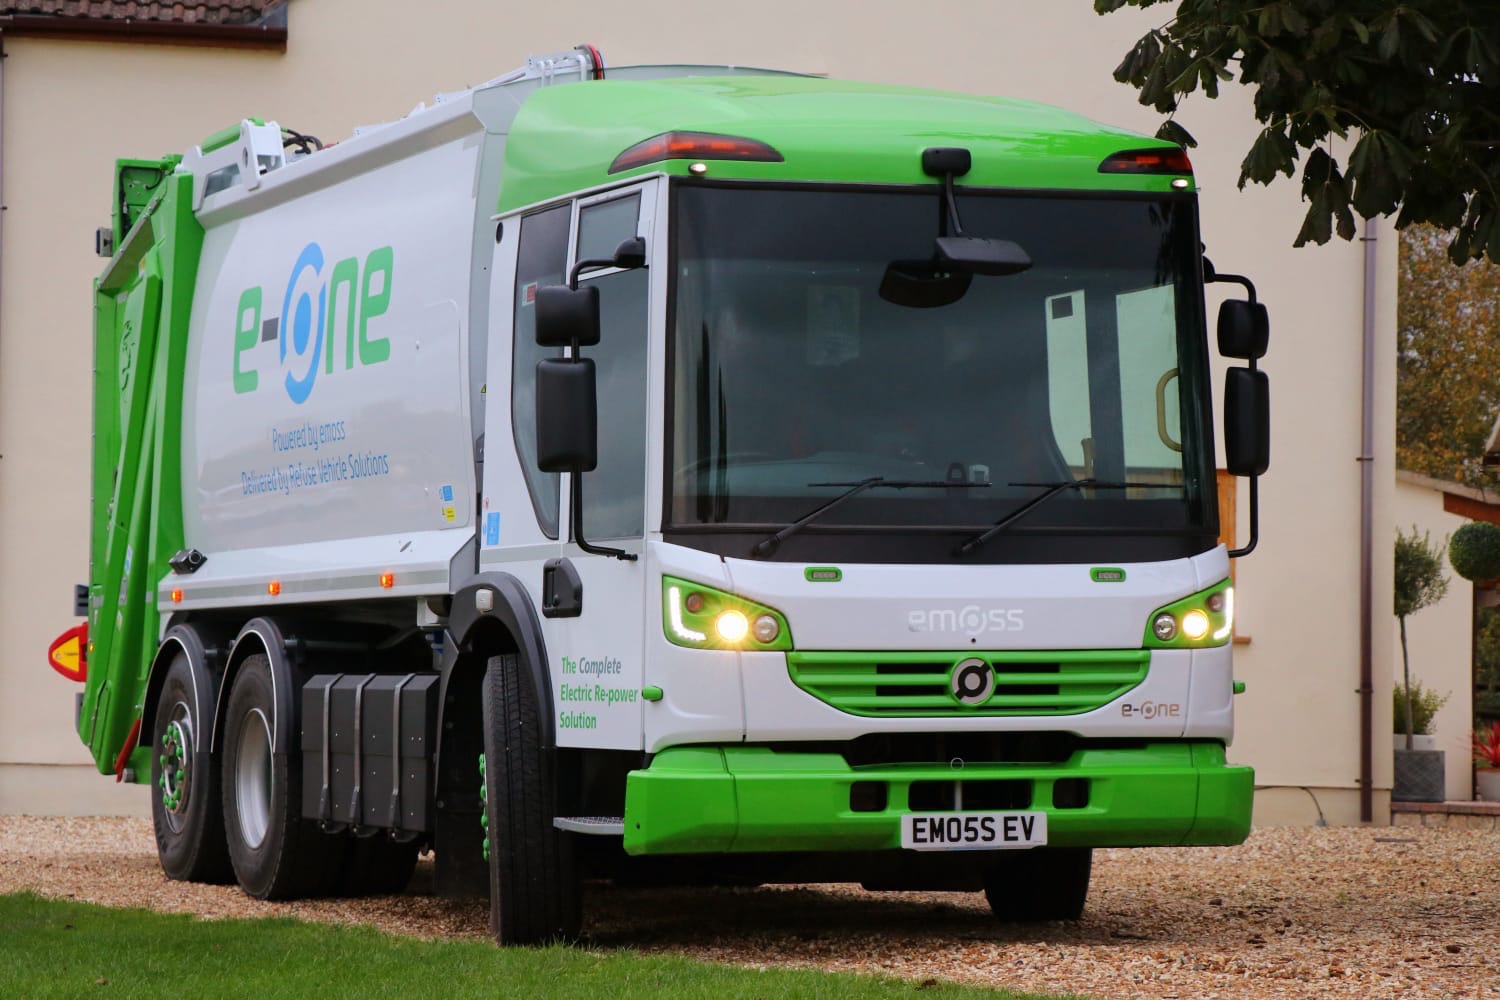 RVS ranked highest for electric refuse vehicle conversion on new HGV